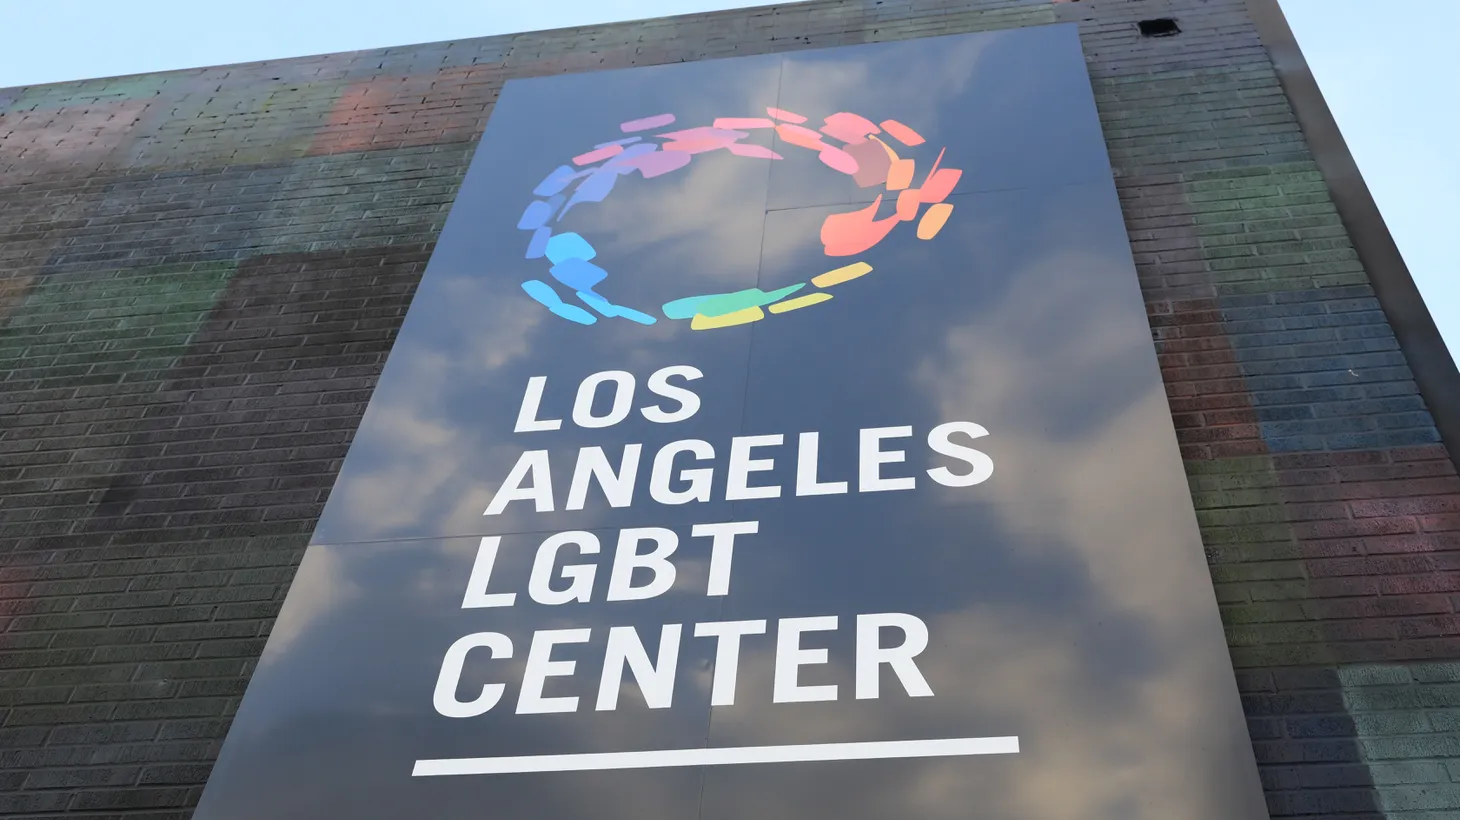 Having LGBTQ-centered, culturally relevant services can mean the difference between life and death for queer survivors of intimate partner violence, says LA LGBT Center Chief Impact Officer Tarra Russell-Slavin.